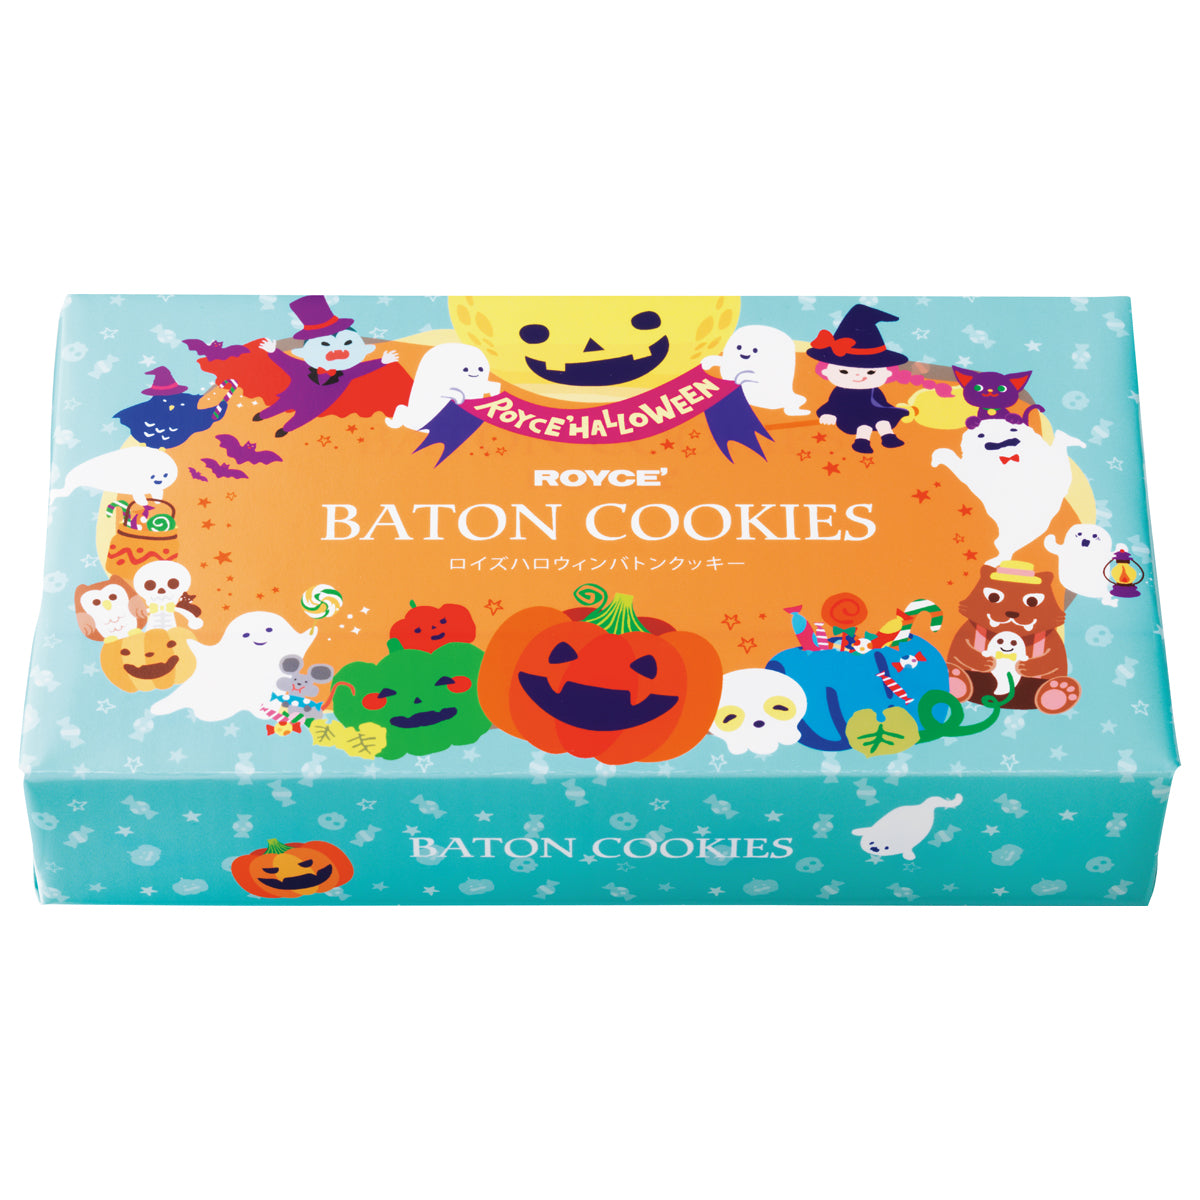 Image shows a blue and orange box on left with illustrations of ghosts, animals and pumpkins. Text says ROYCE' Halloween ROYCE' Baton Cookies.